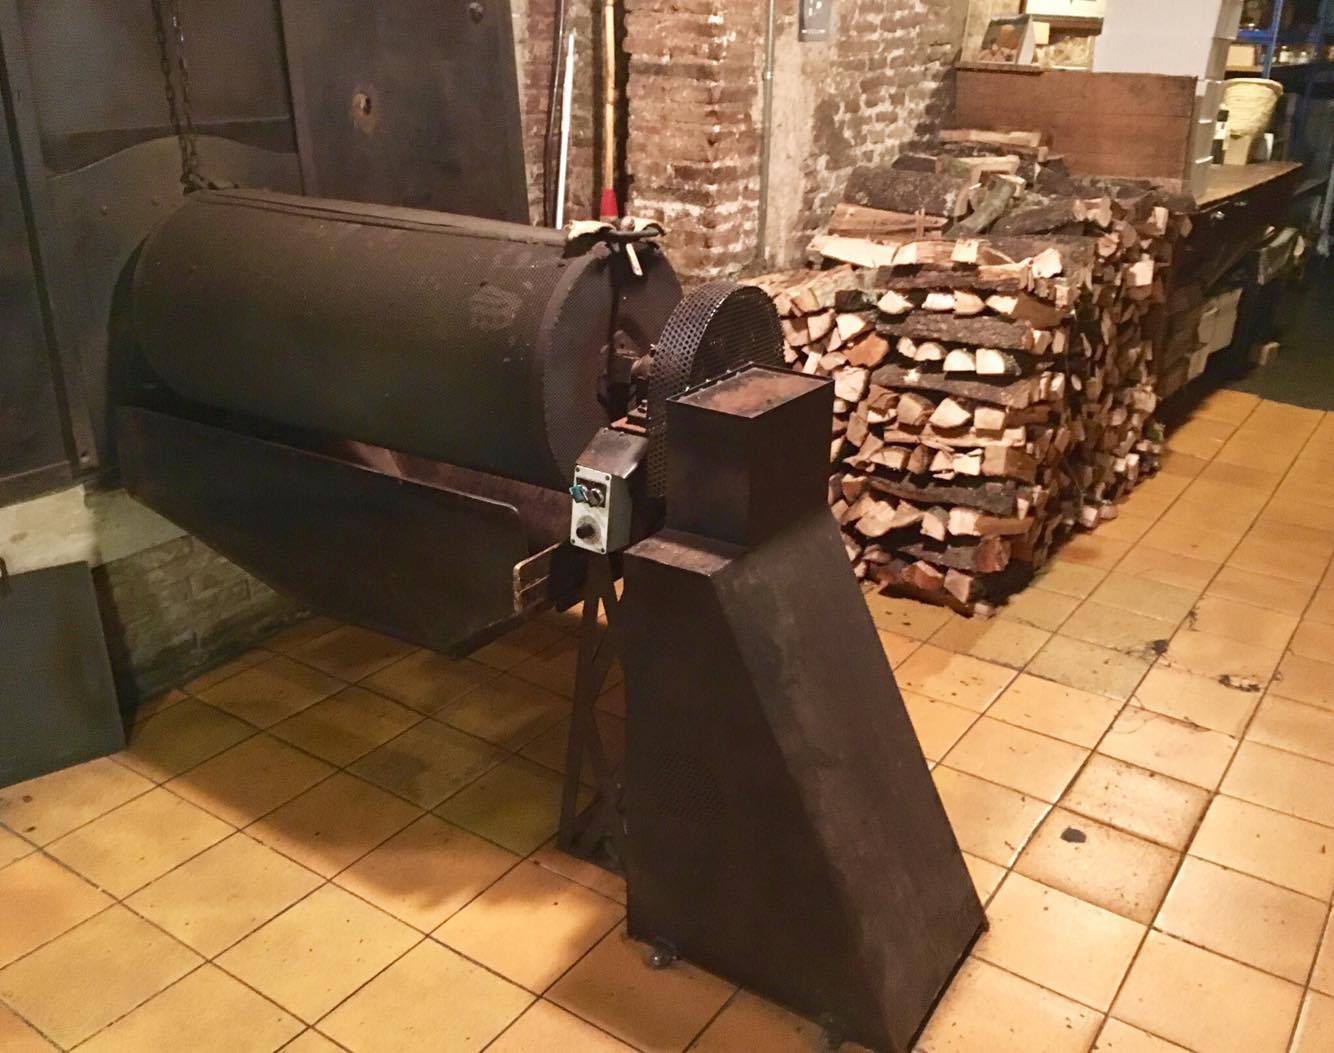  The roasting oven, using chopped wood. 